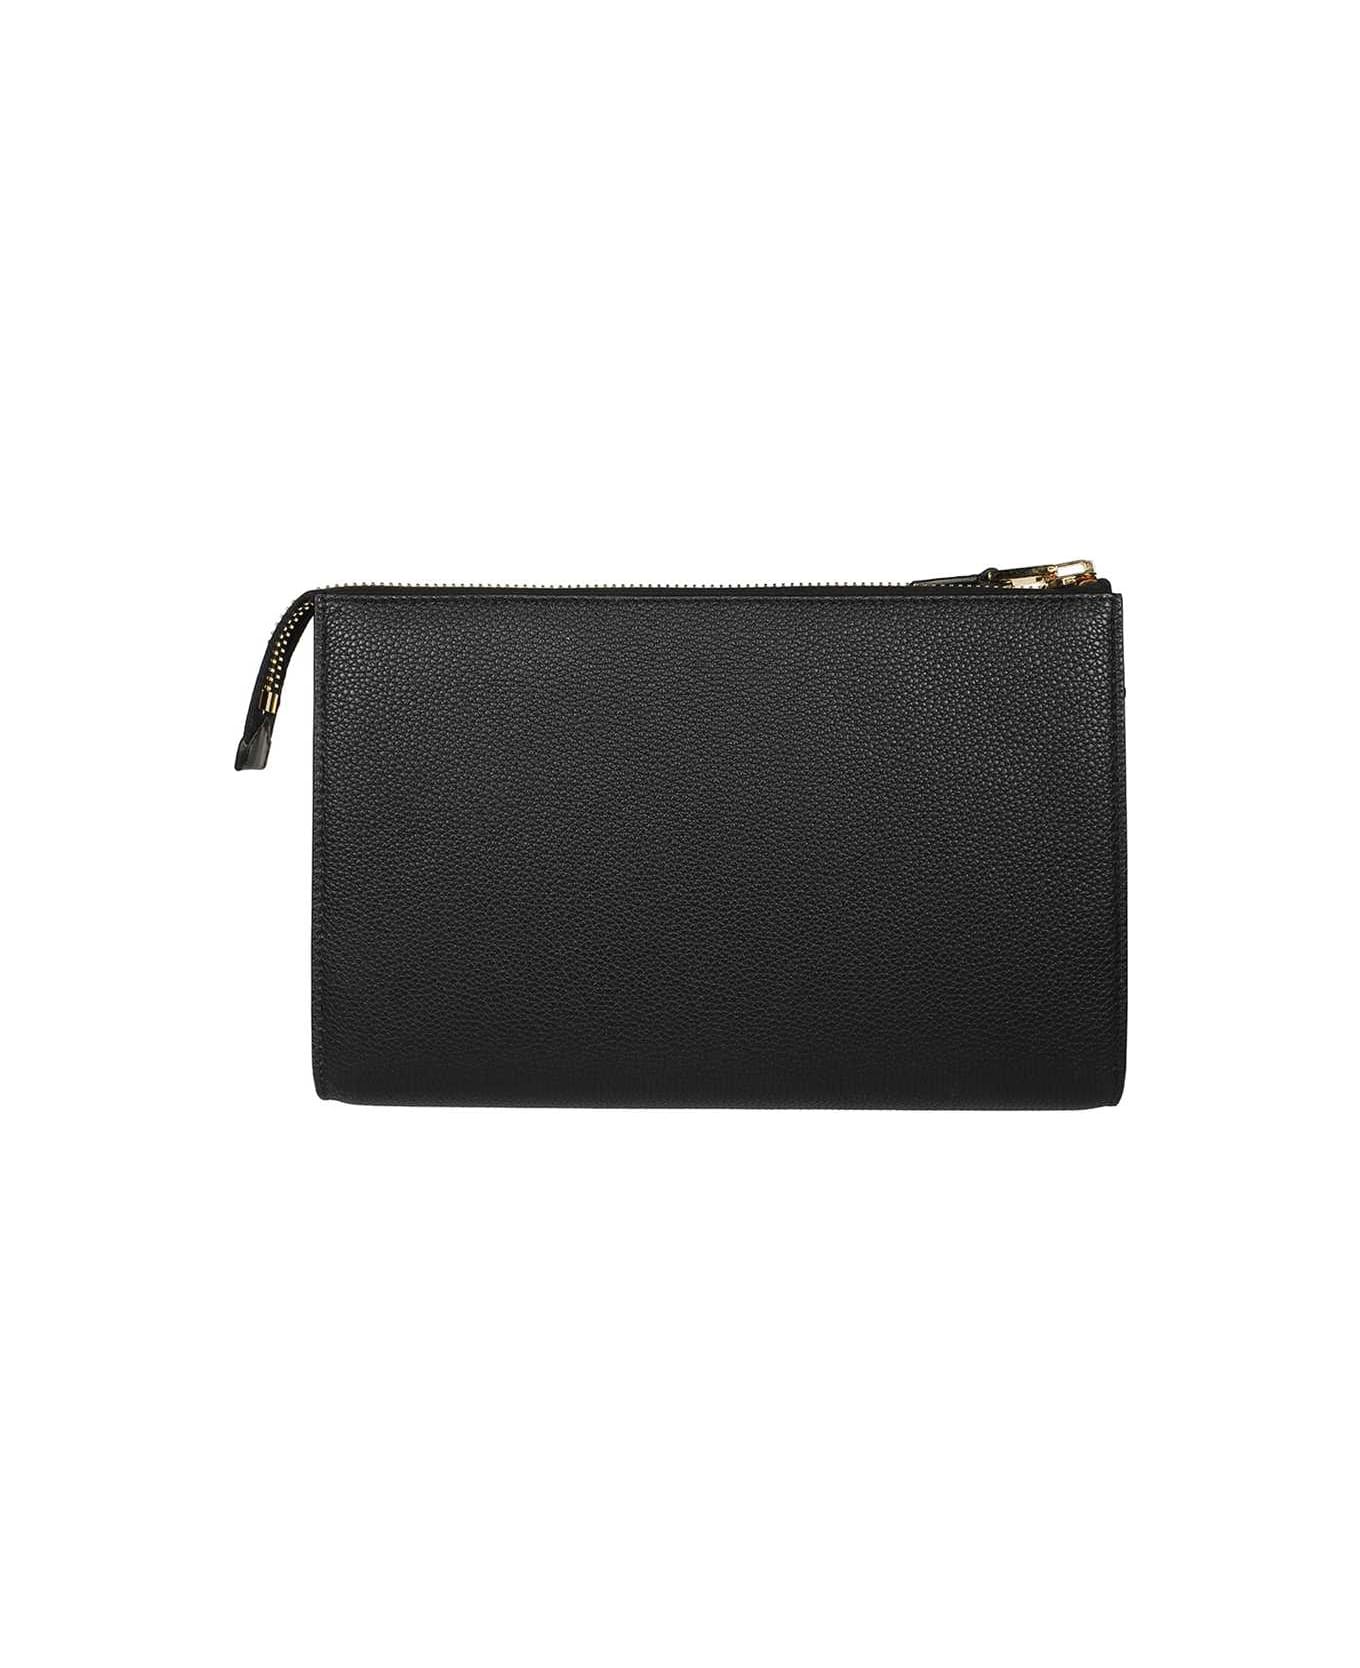 Tom Ford Leather Flat Pouch - black バッグ